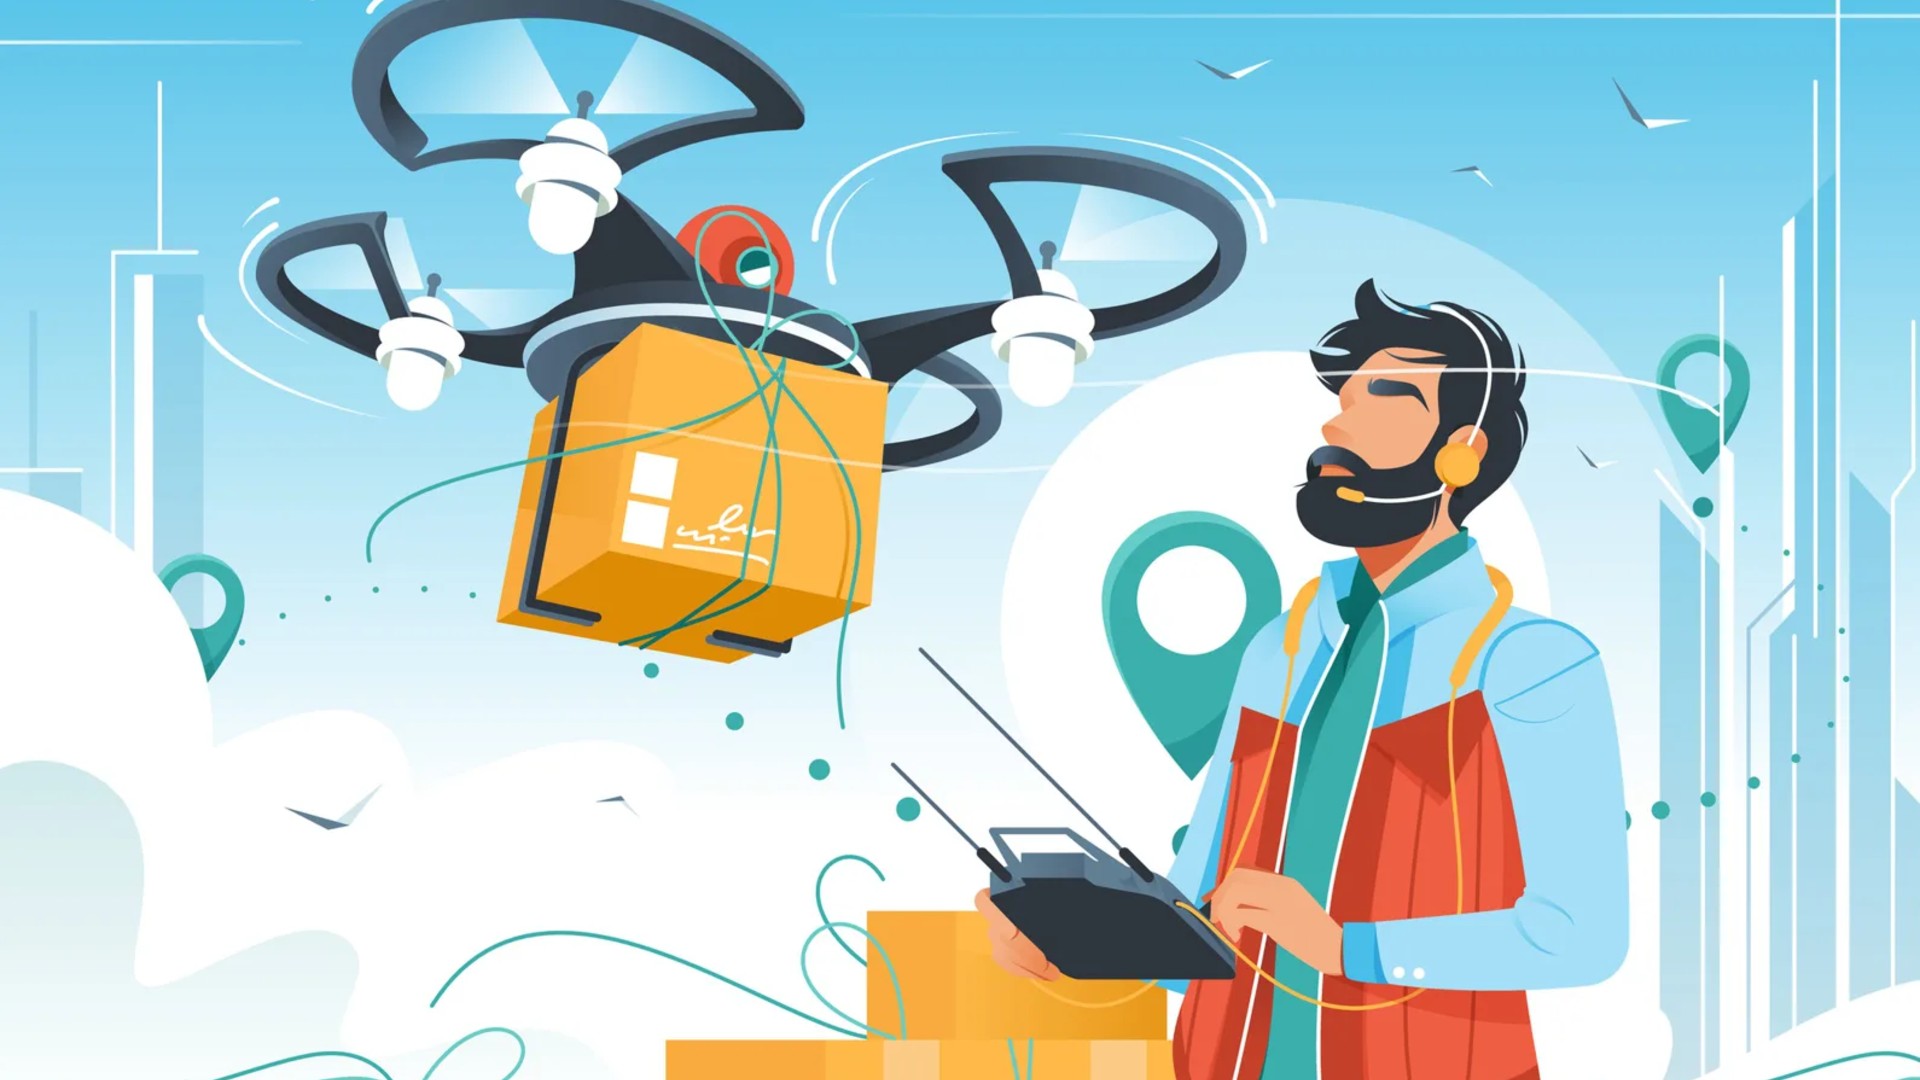 Swiggy will deliver your food and medicine by drone! Partners with a drone alliance